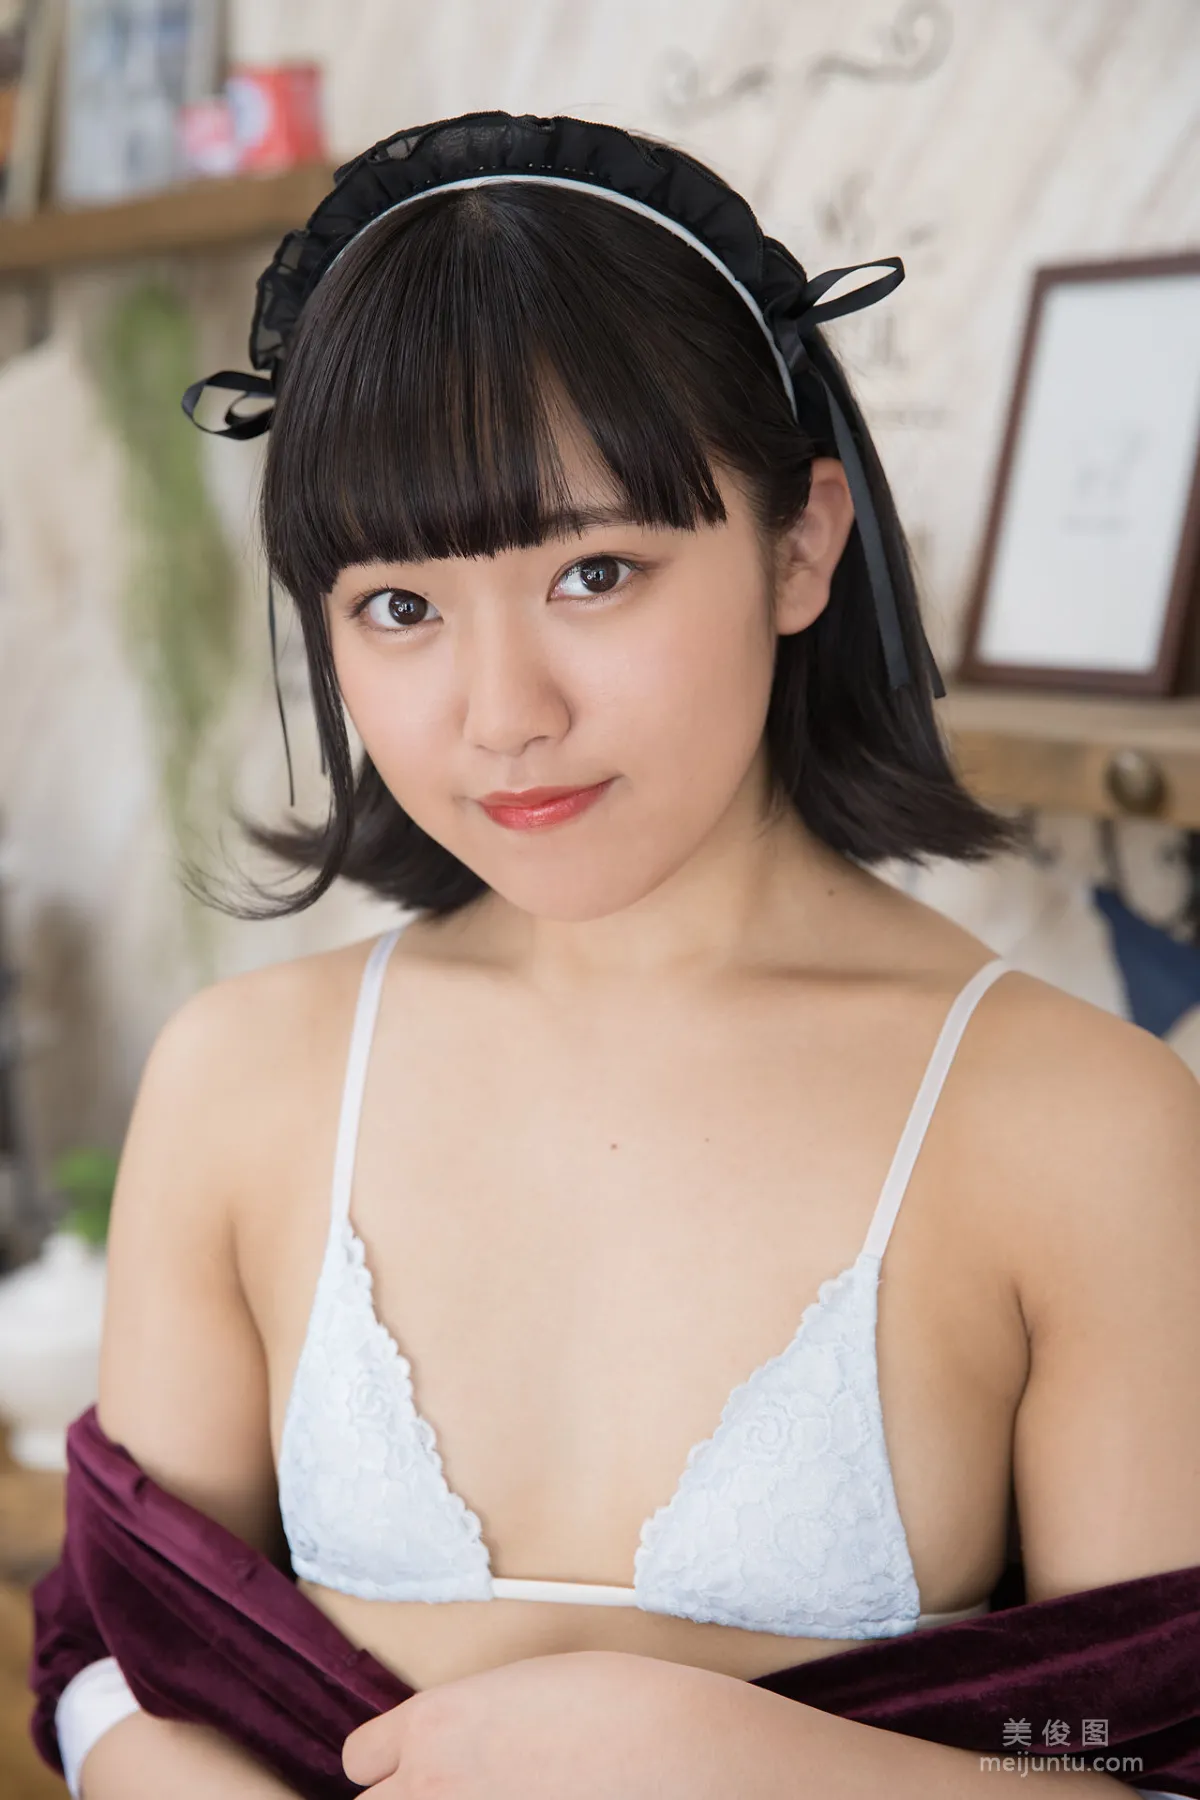 [Minisuka.tv] 香月りお - Limited Gallery 15.127